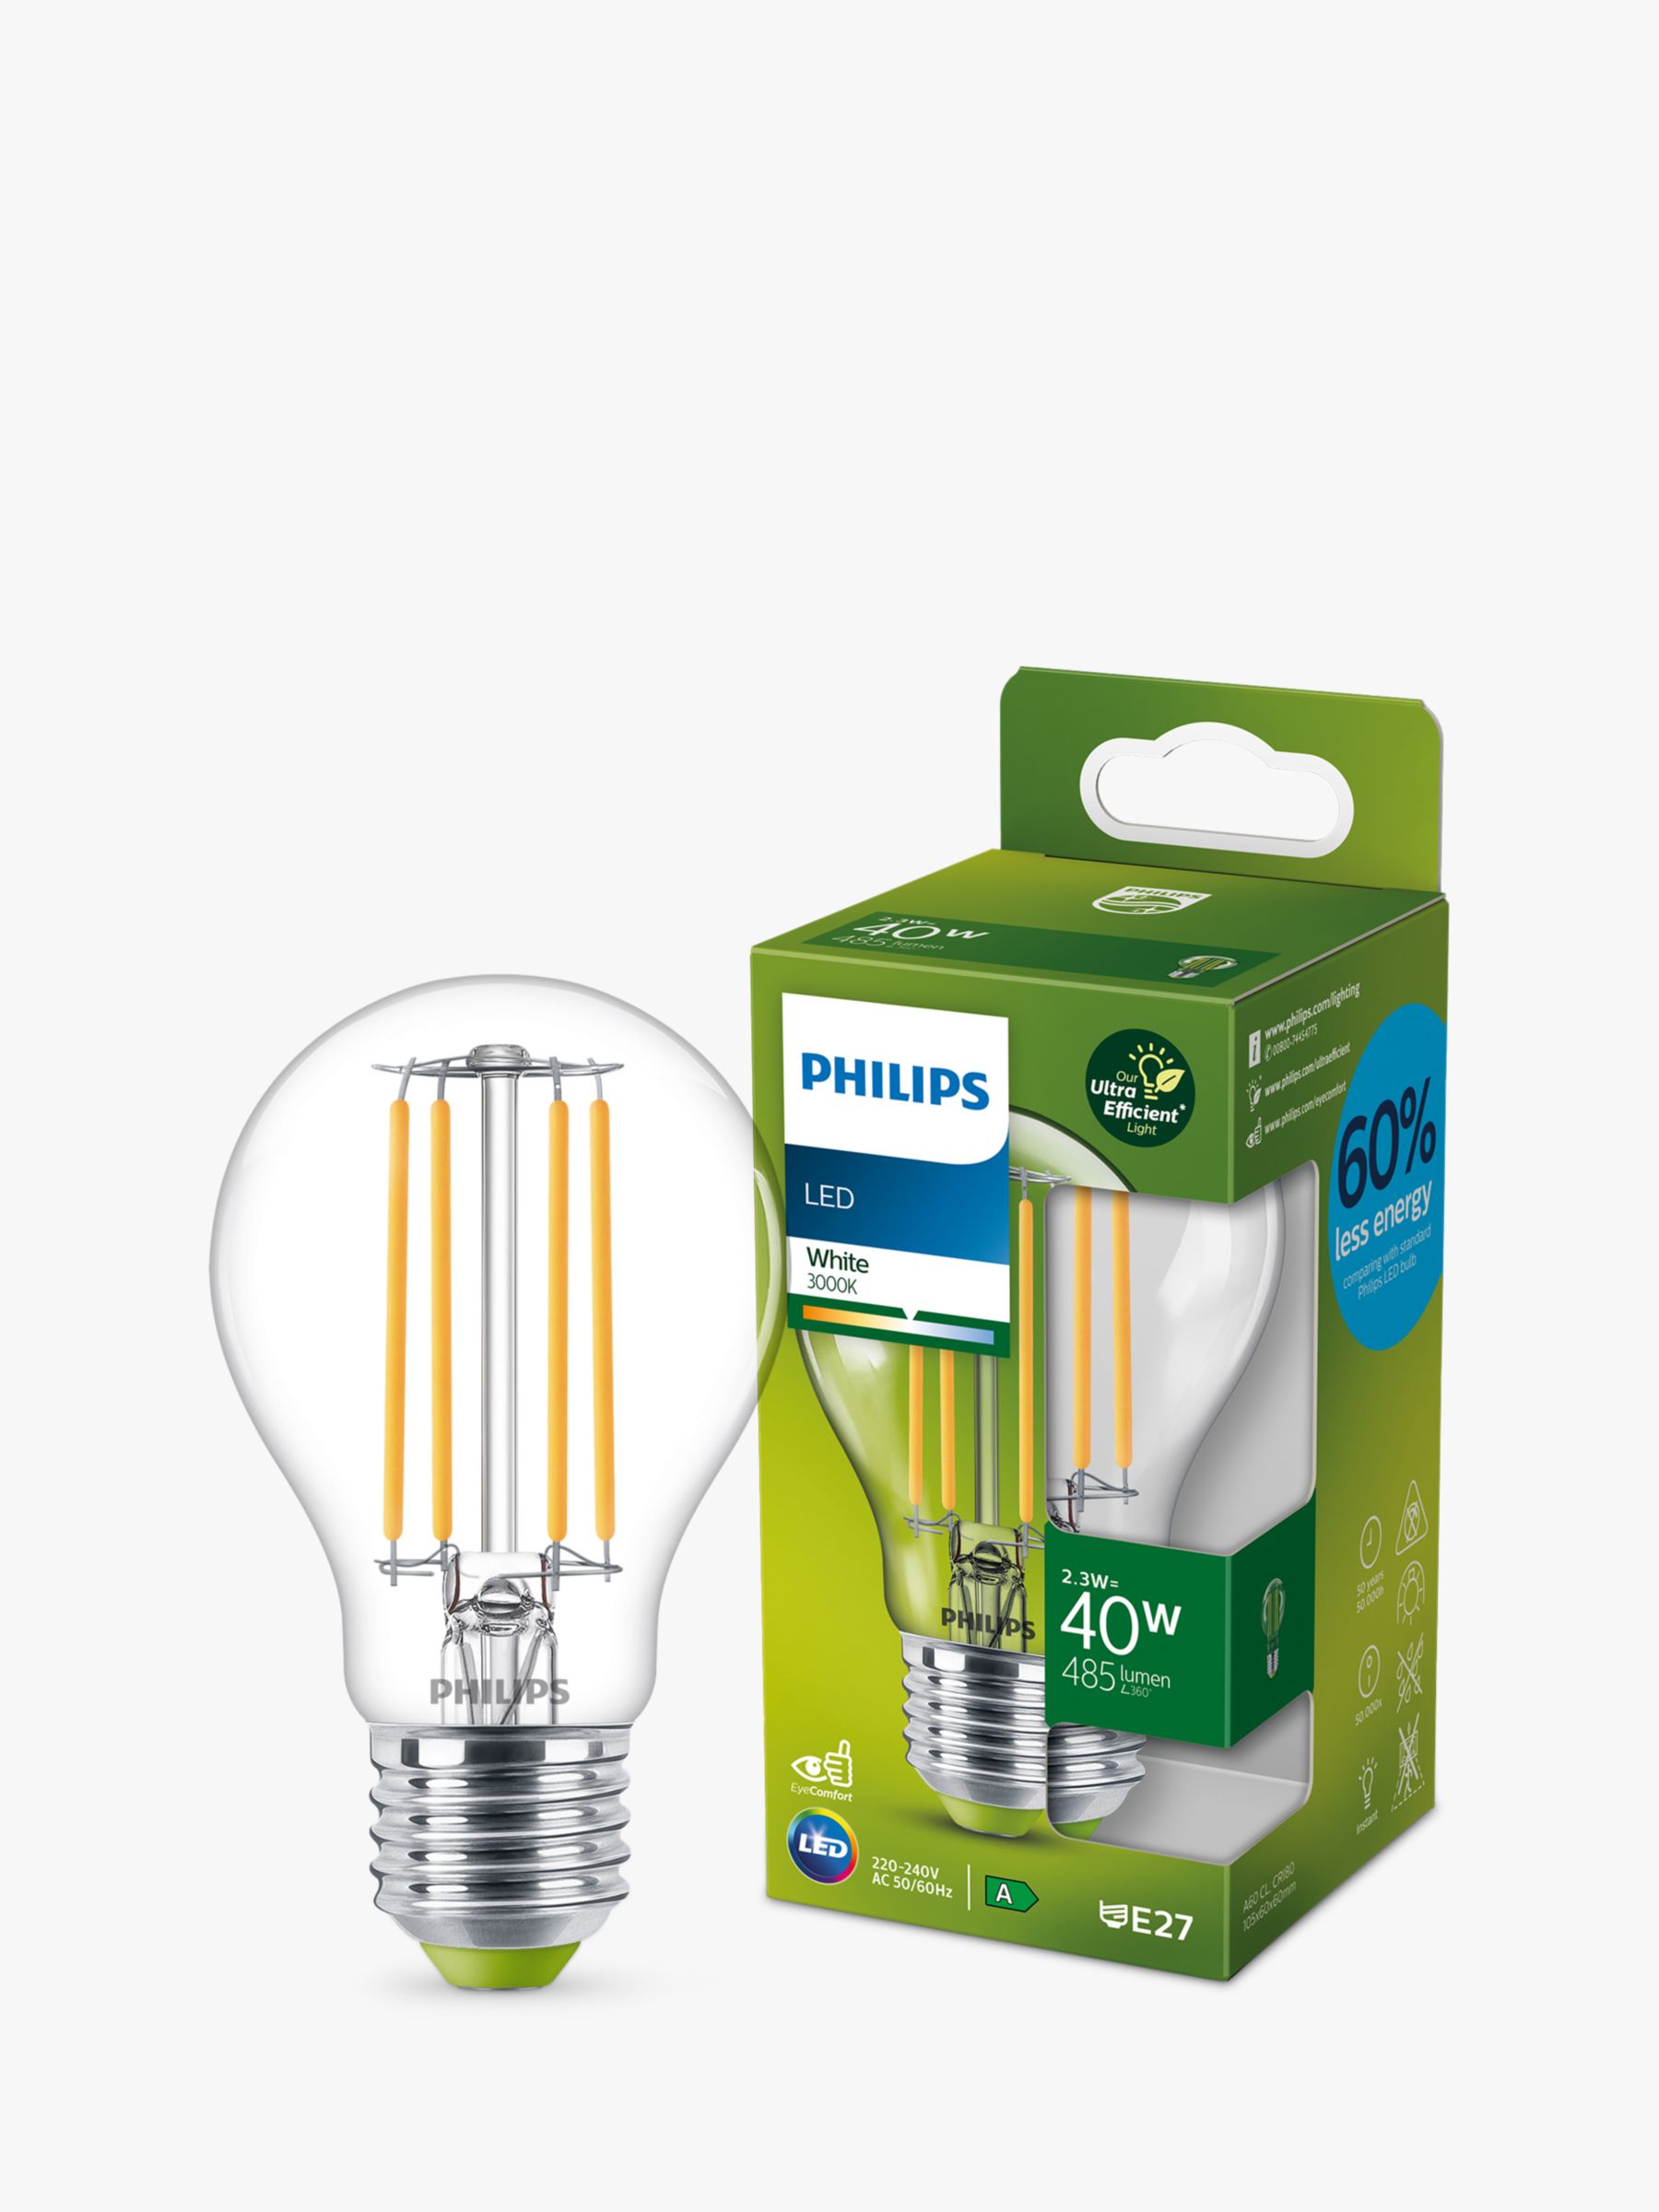 Philips Energy Efficient 2.3W E27 LED Non-Dimmable Classic Bulb